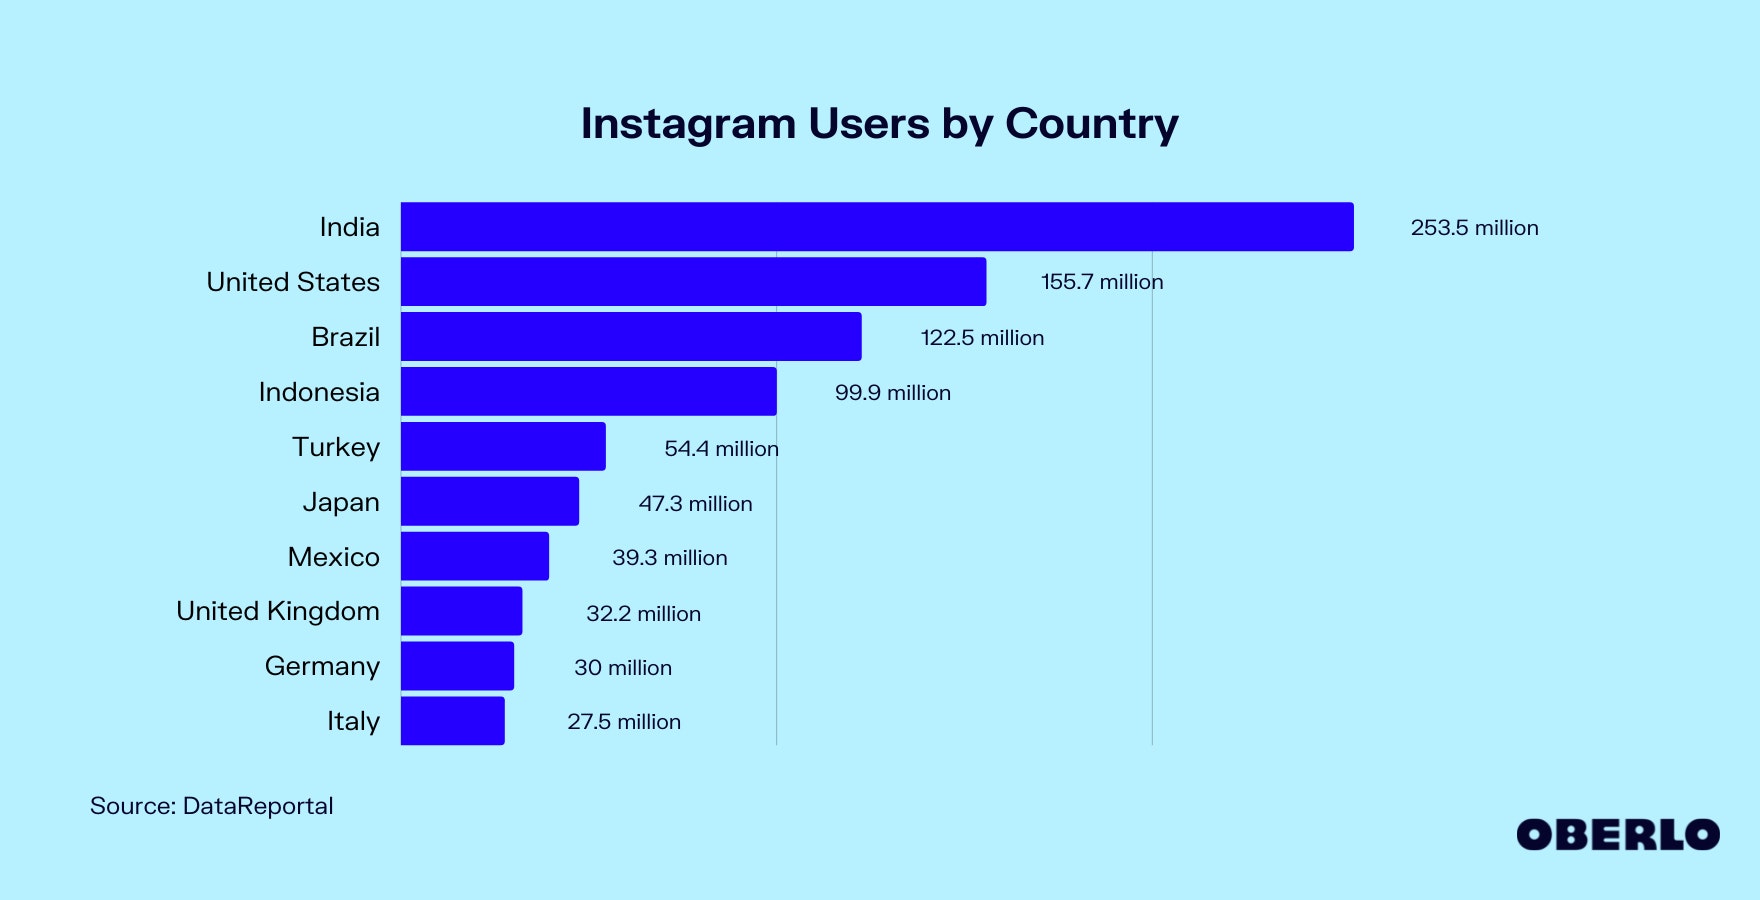 Chart showing the number of Instagram Users by Country